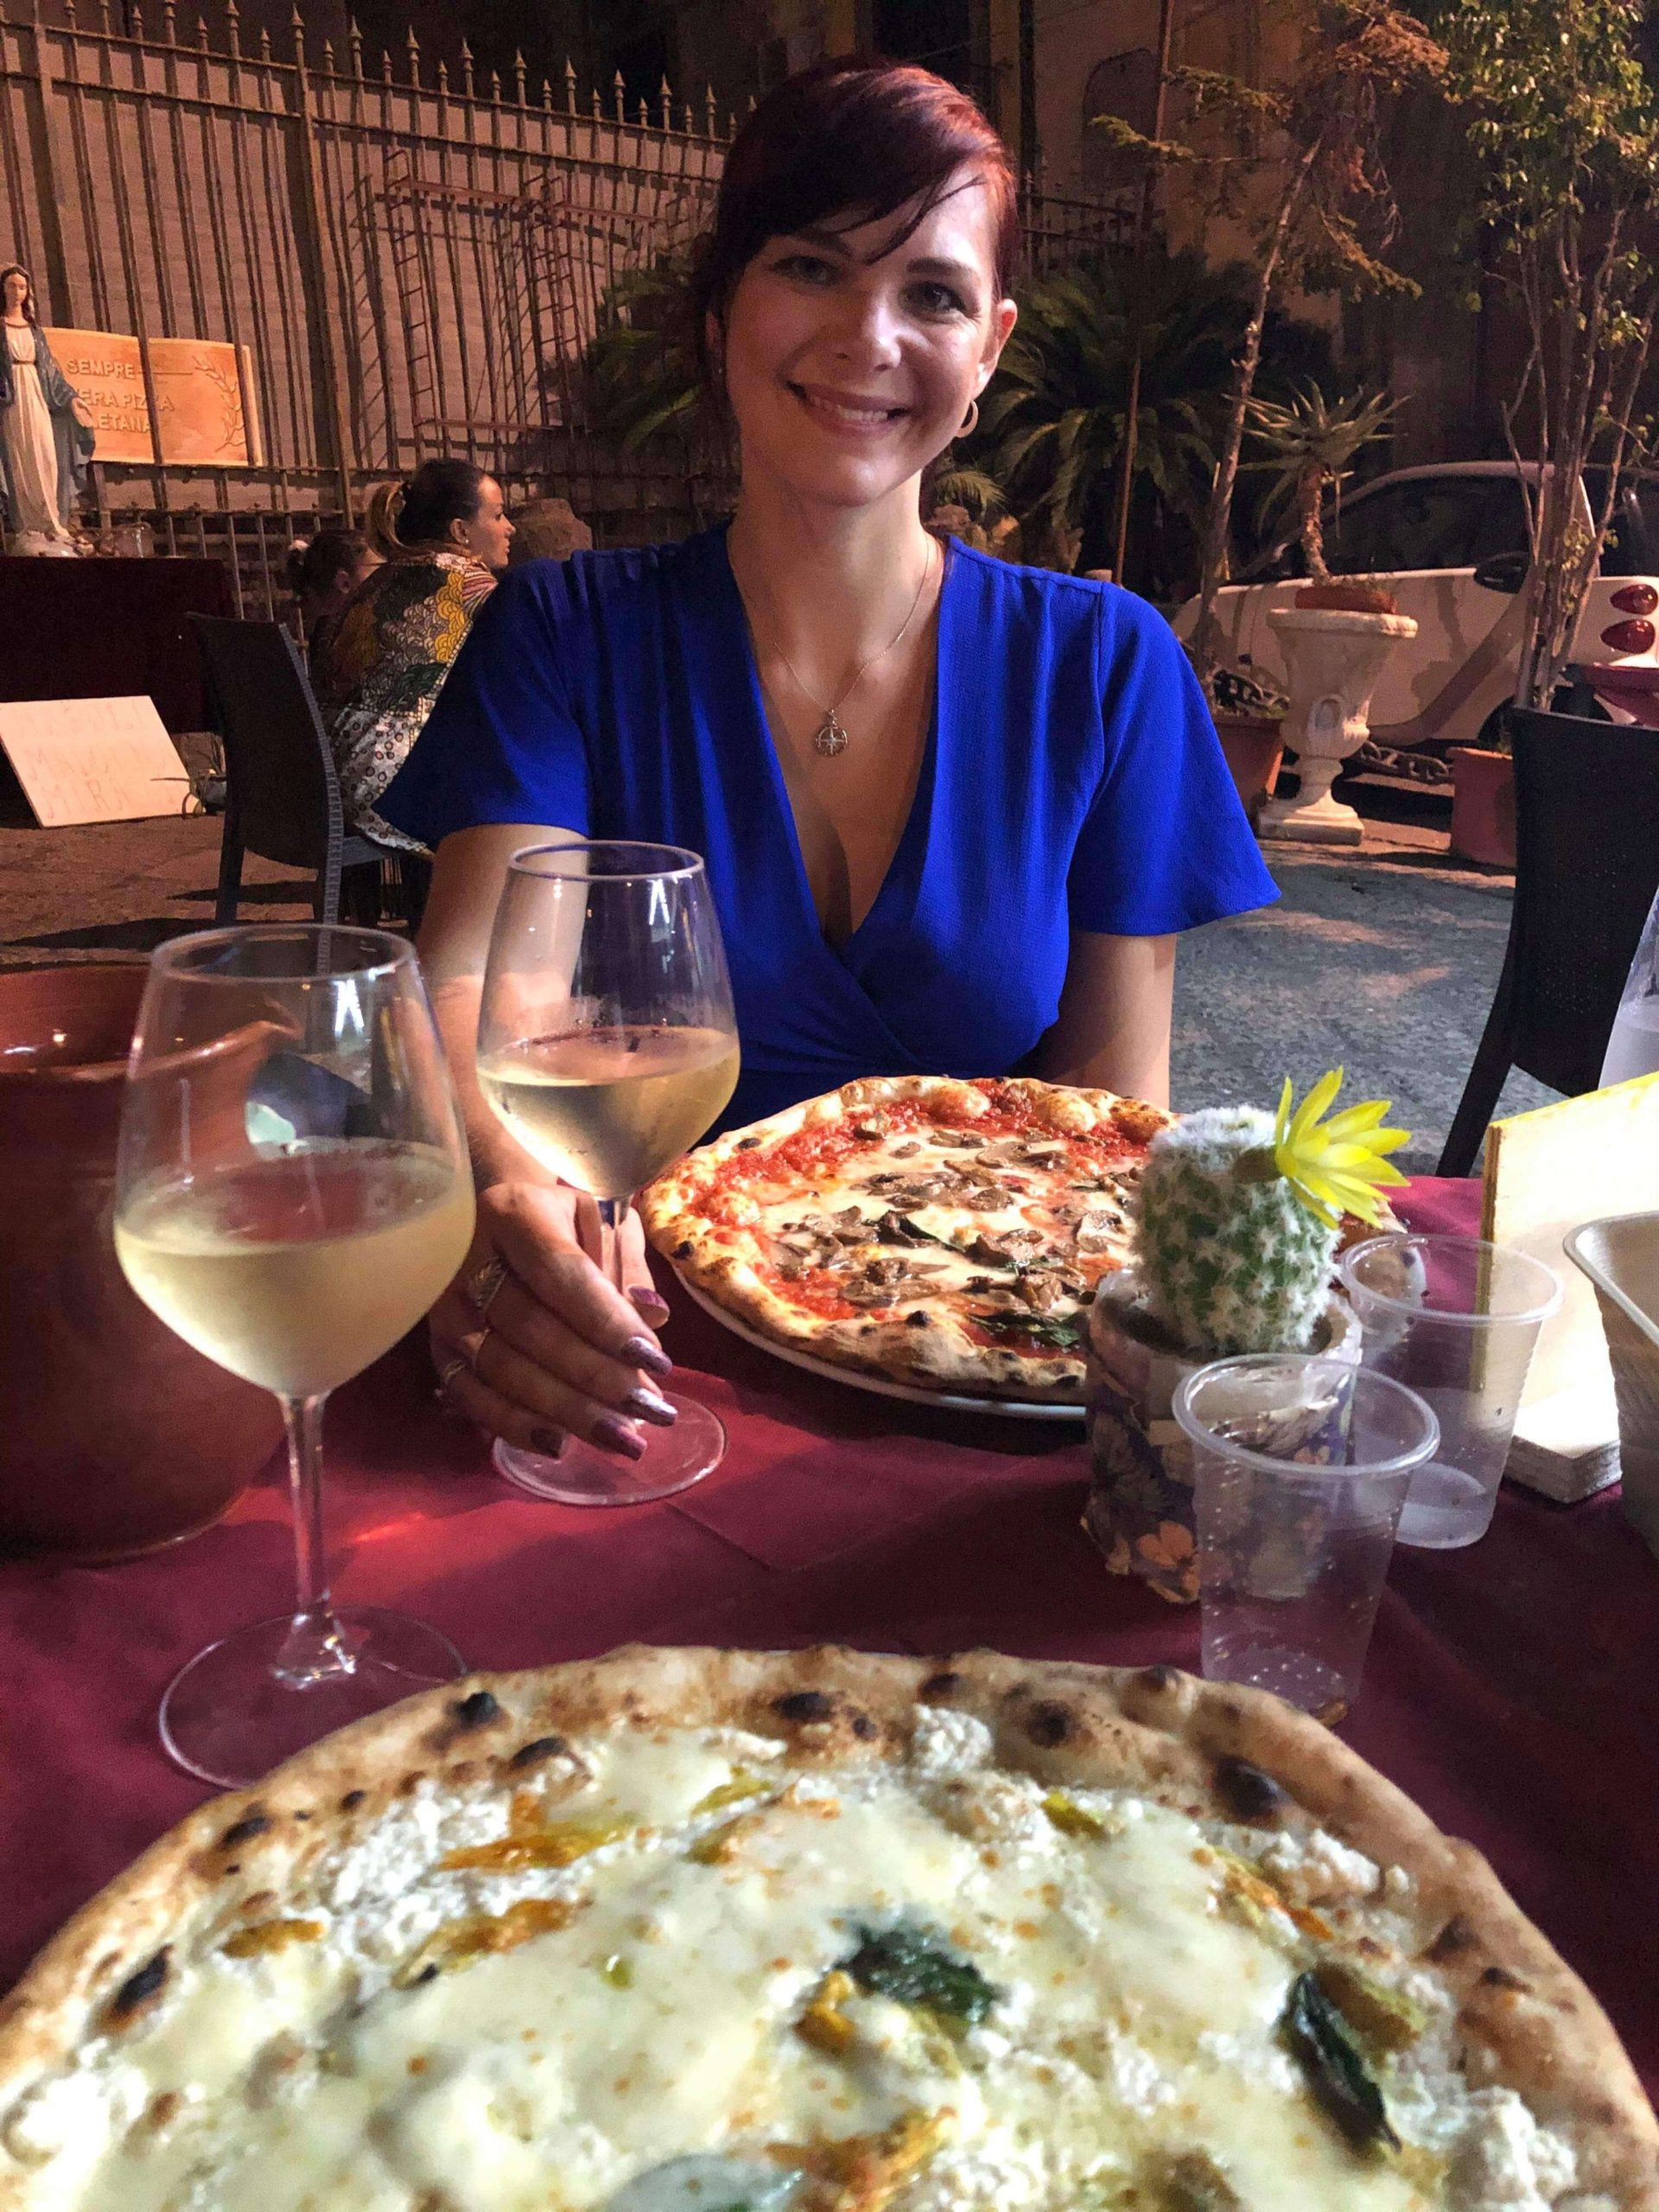 Things to do in Naples - woman eating a pizza in a pizzeria